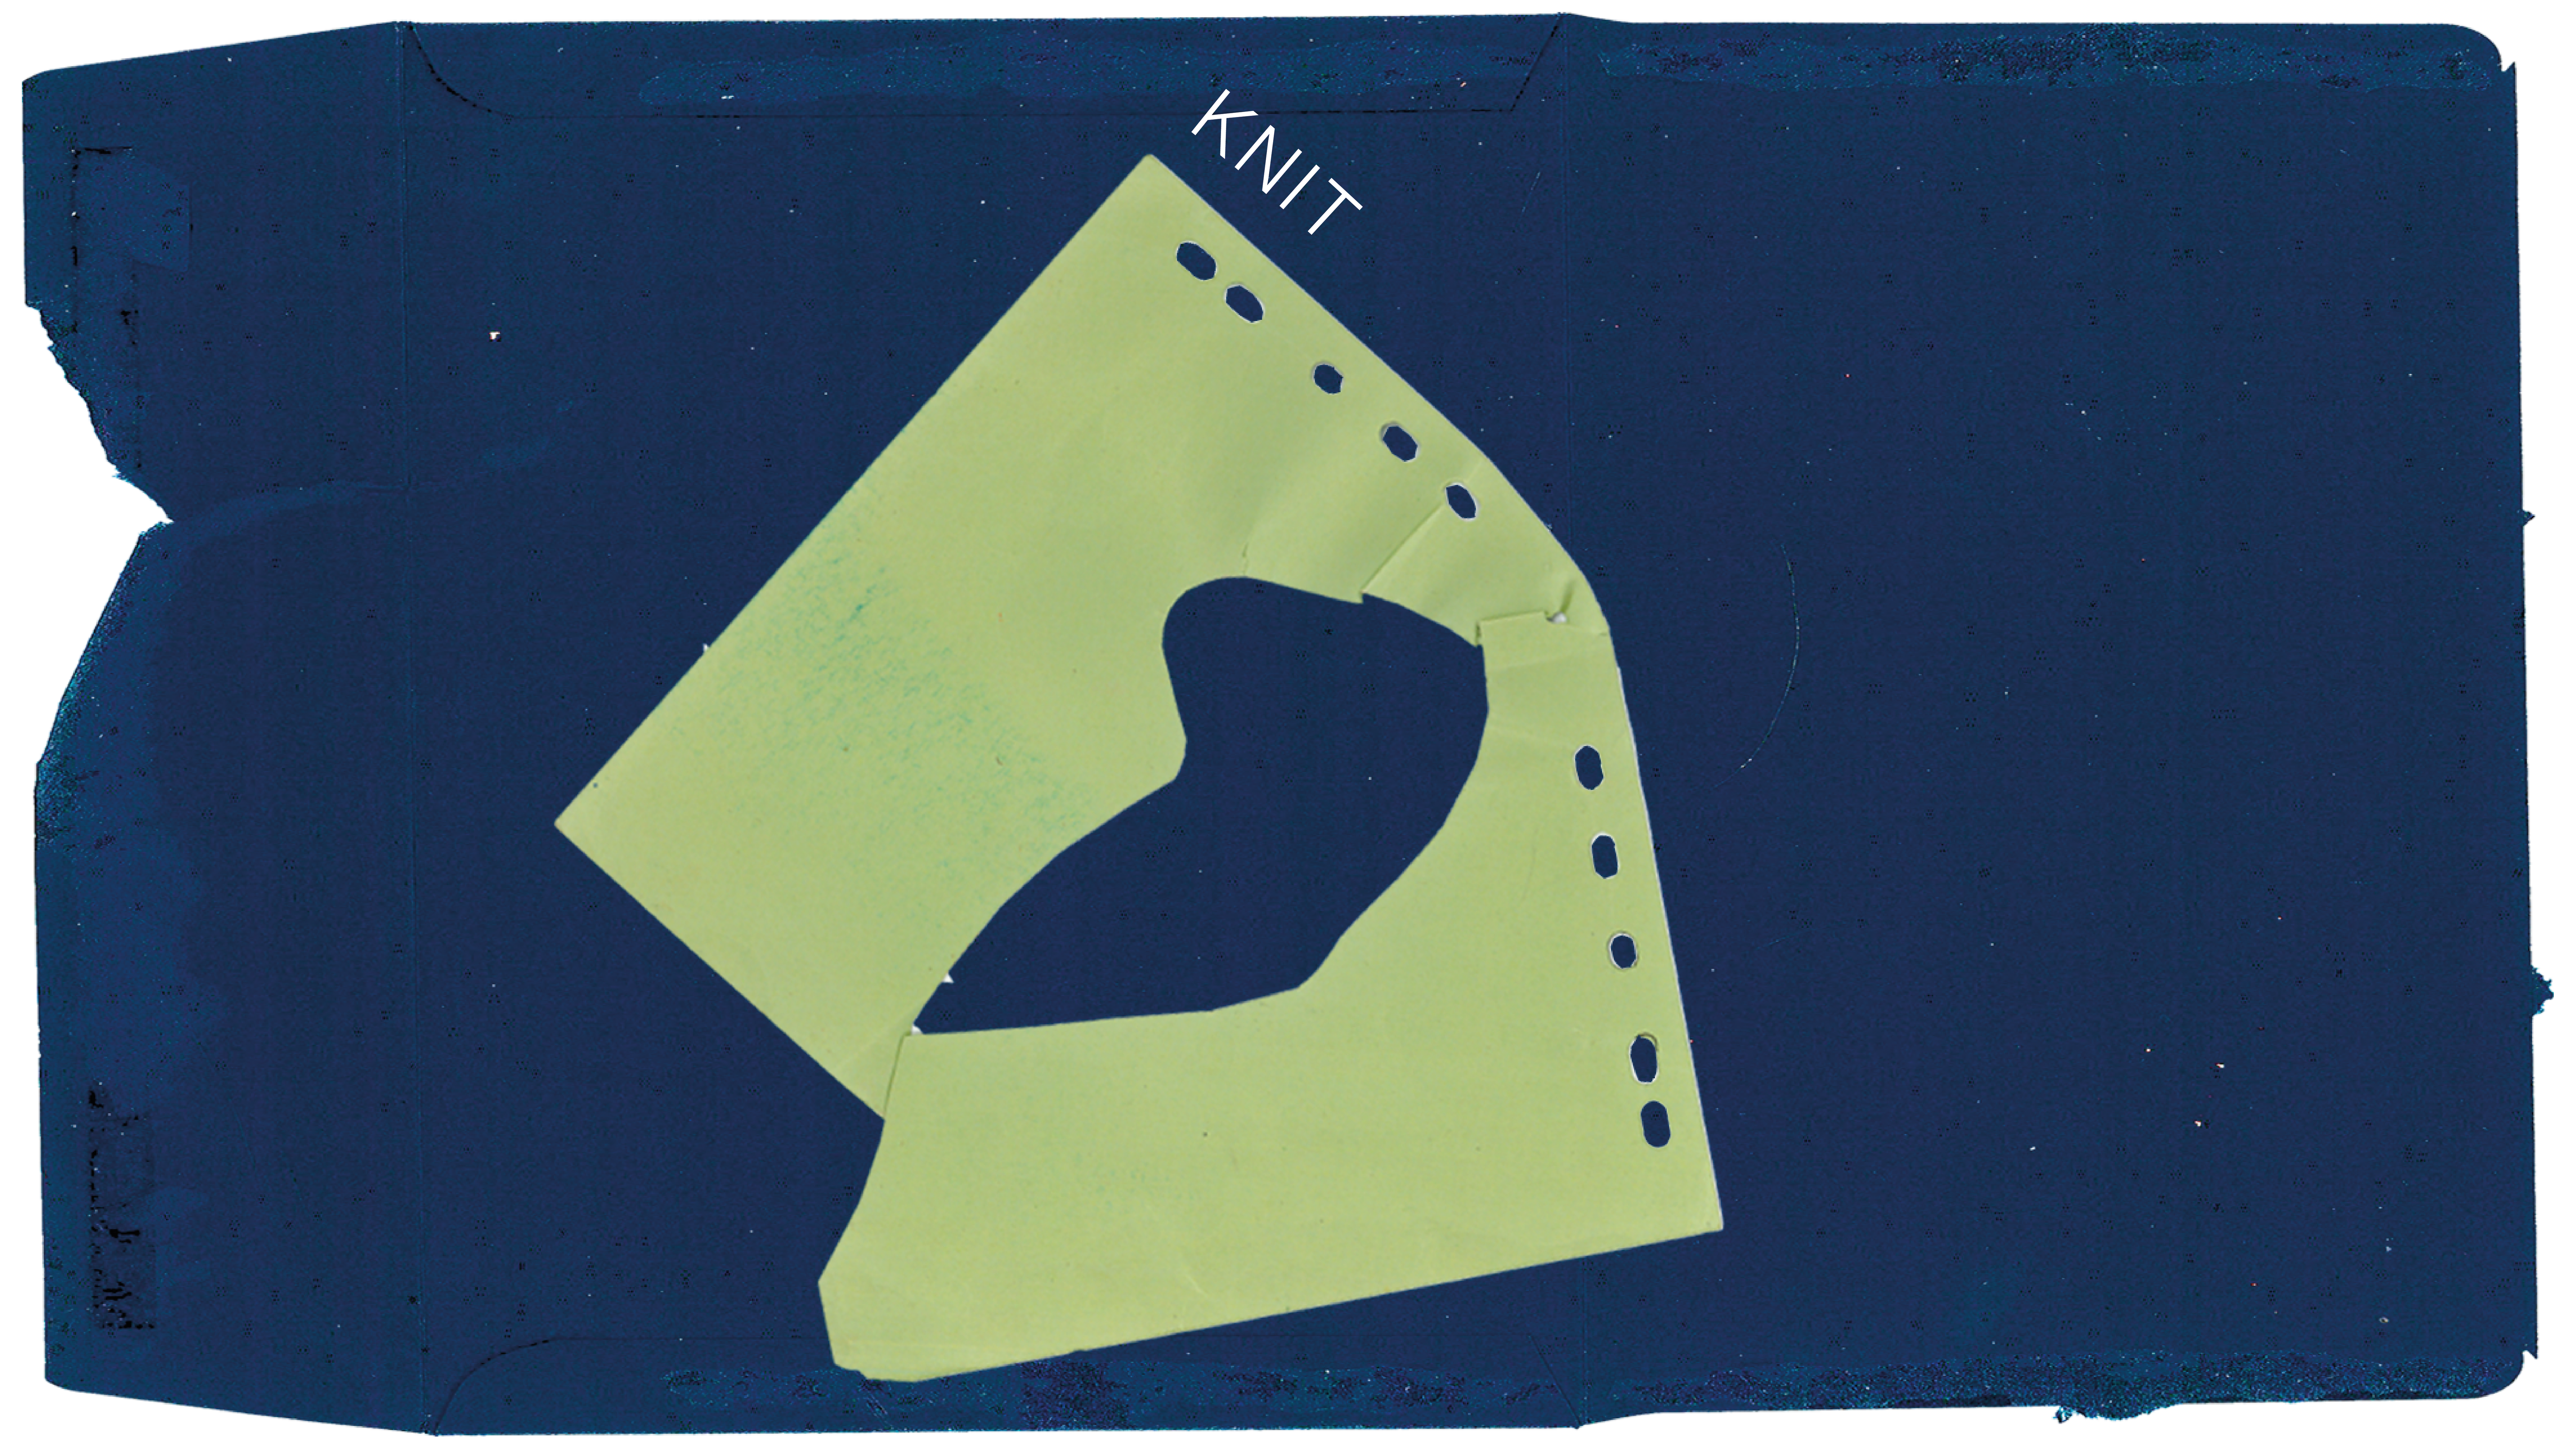 Graphic saying 'knit' in white letters above a green shape which looks like a piece of sewing pattern, on a background of navy fabric.